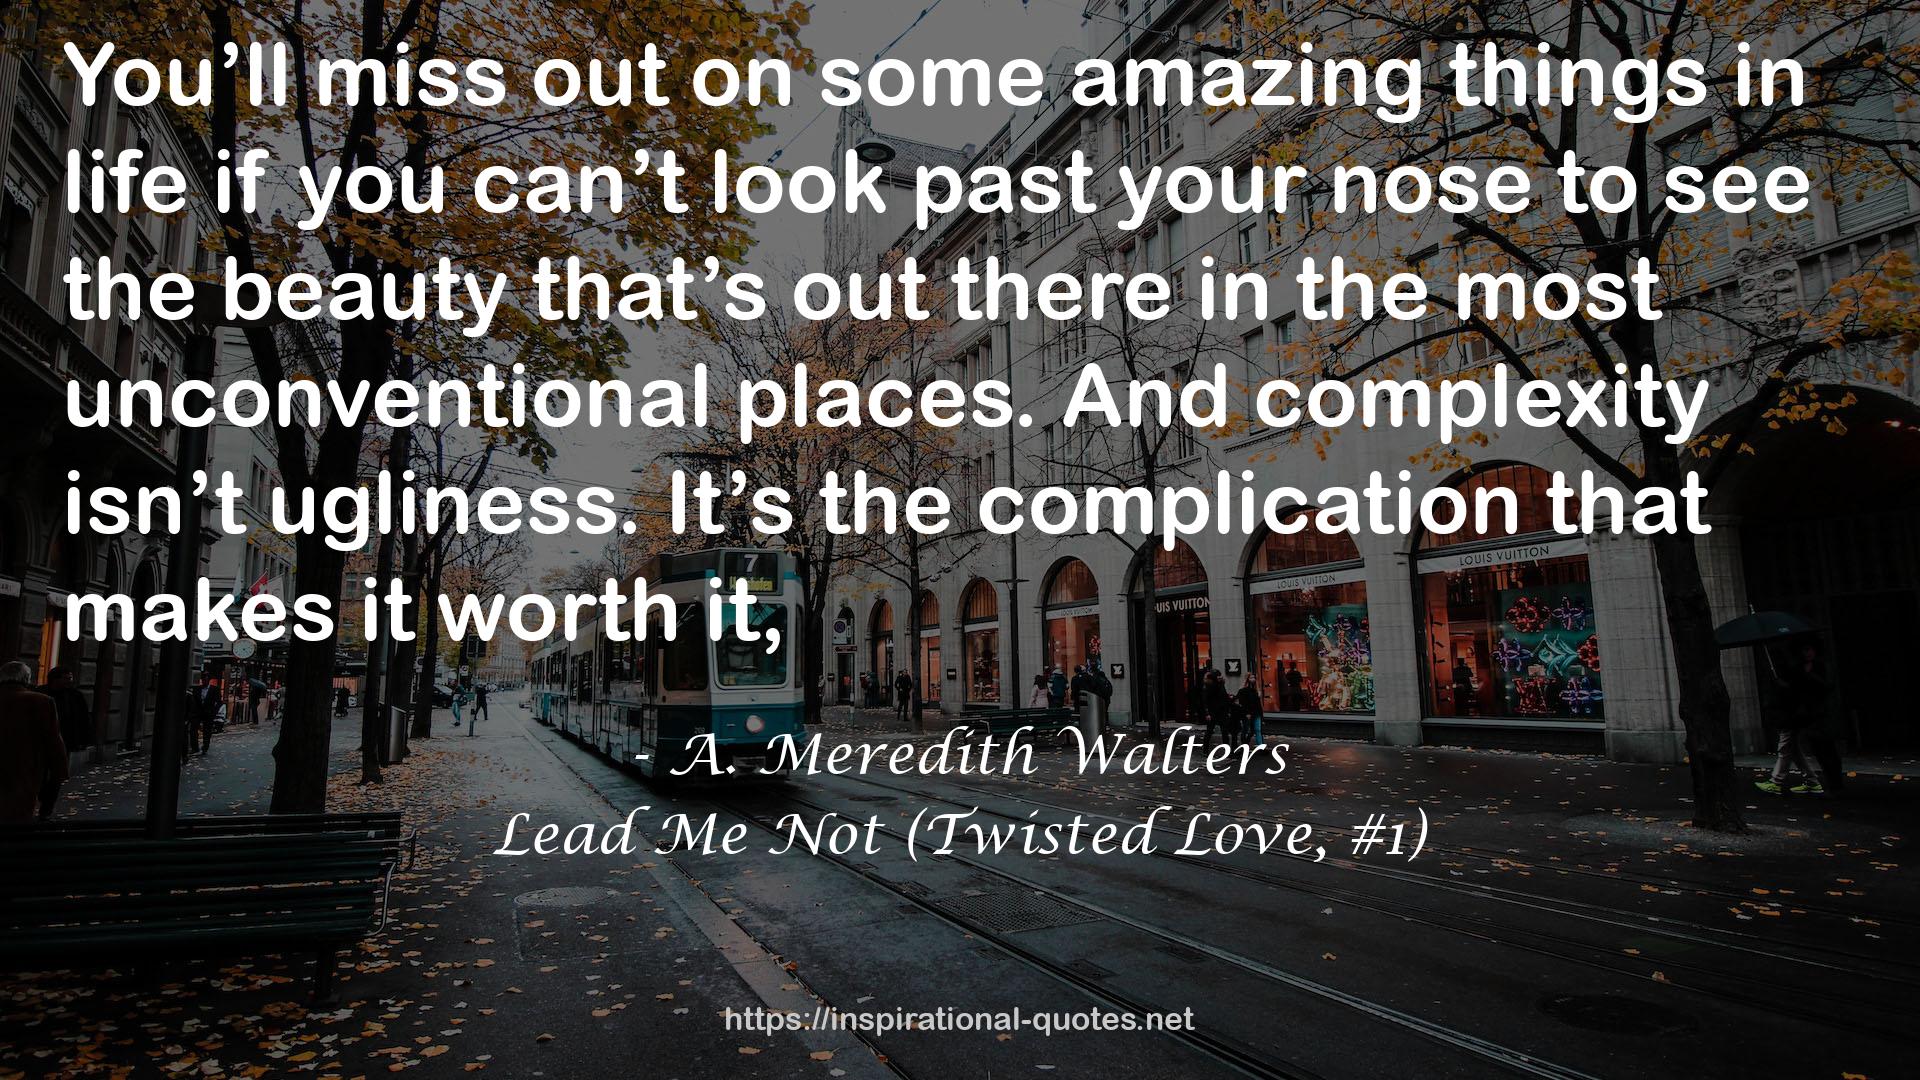 Lead Me Not (Twisted Love, #1) QUOTES